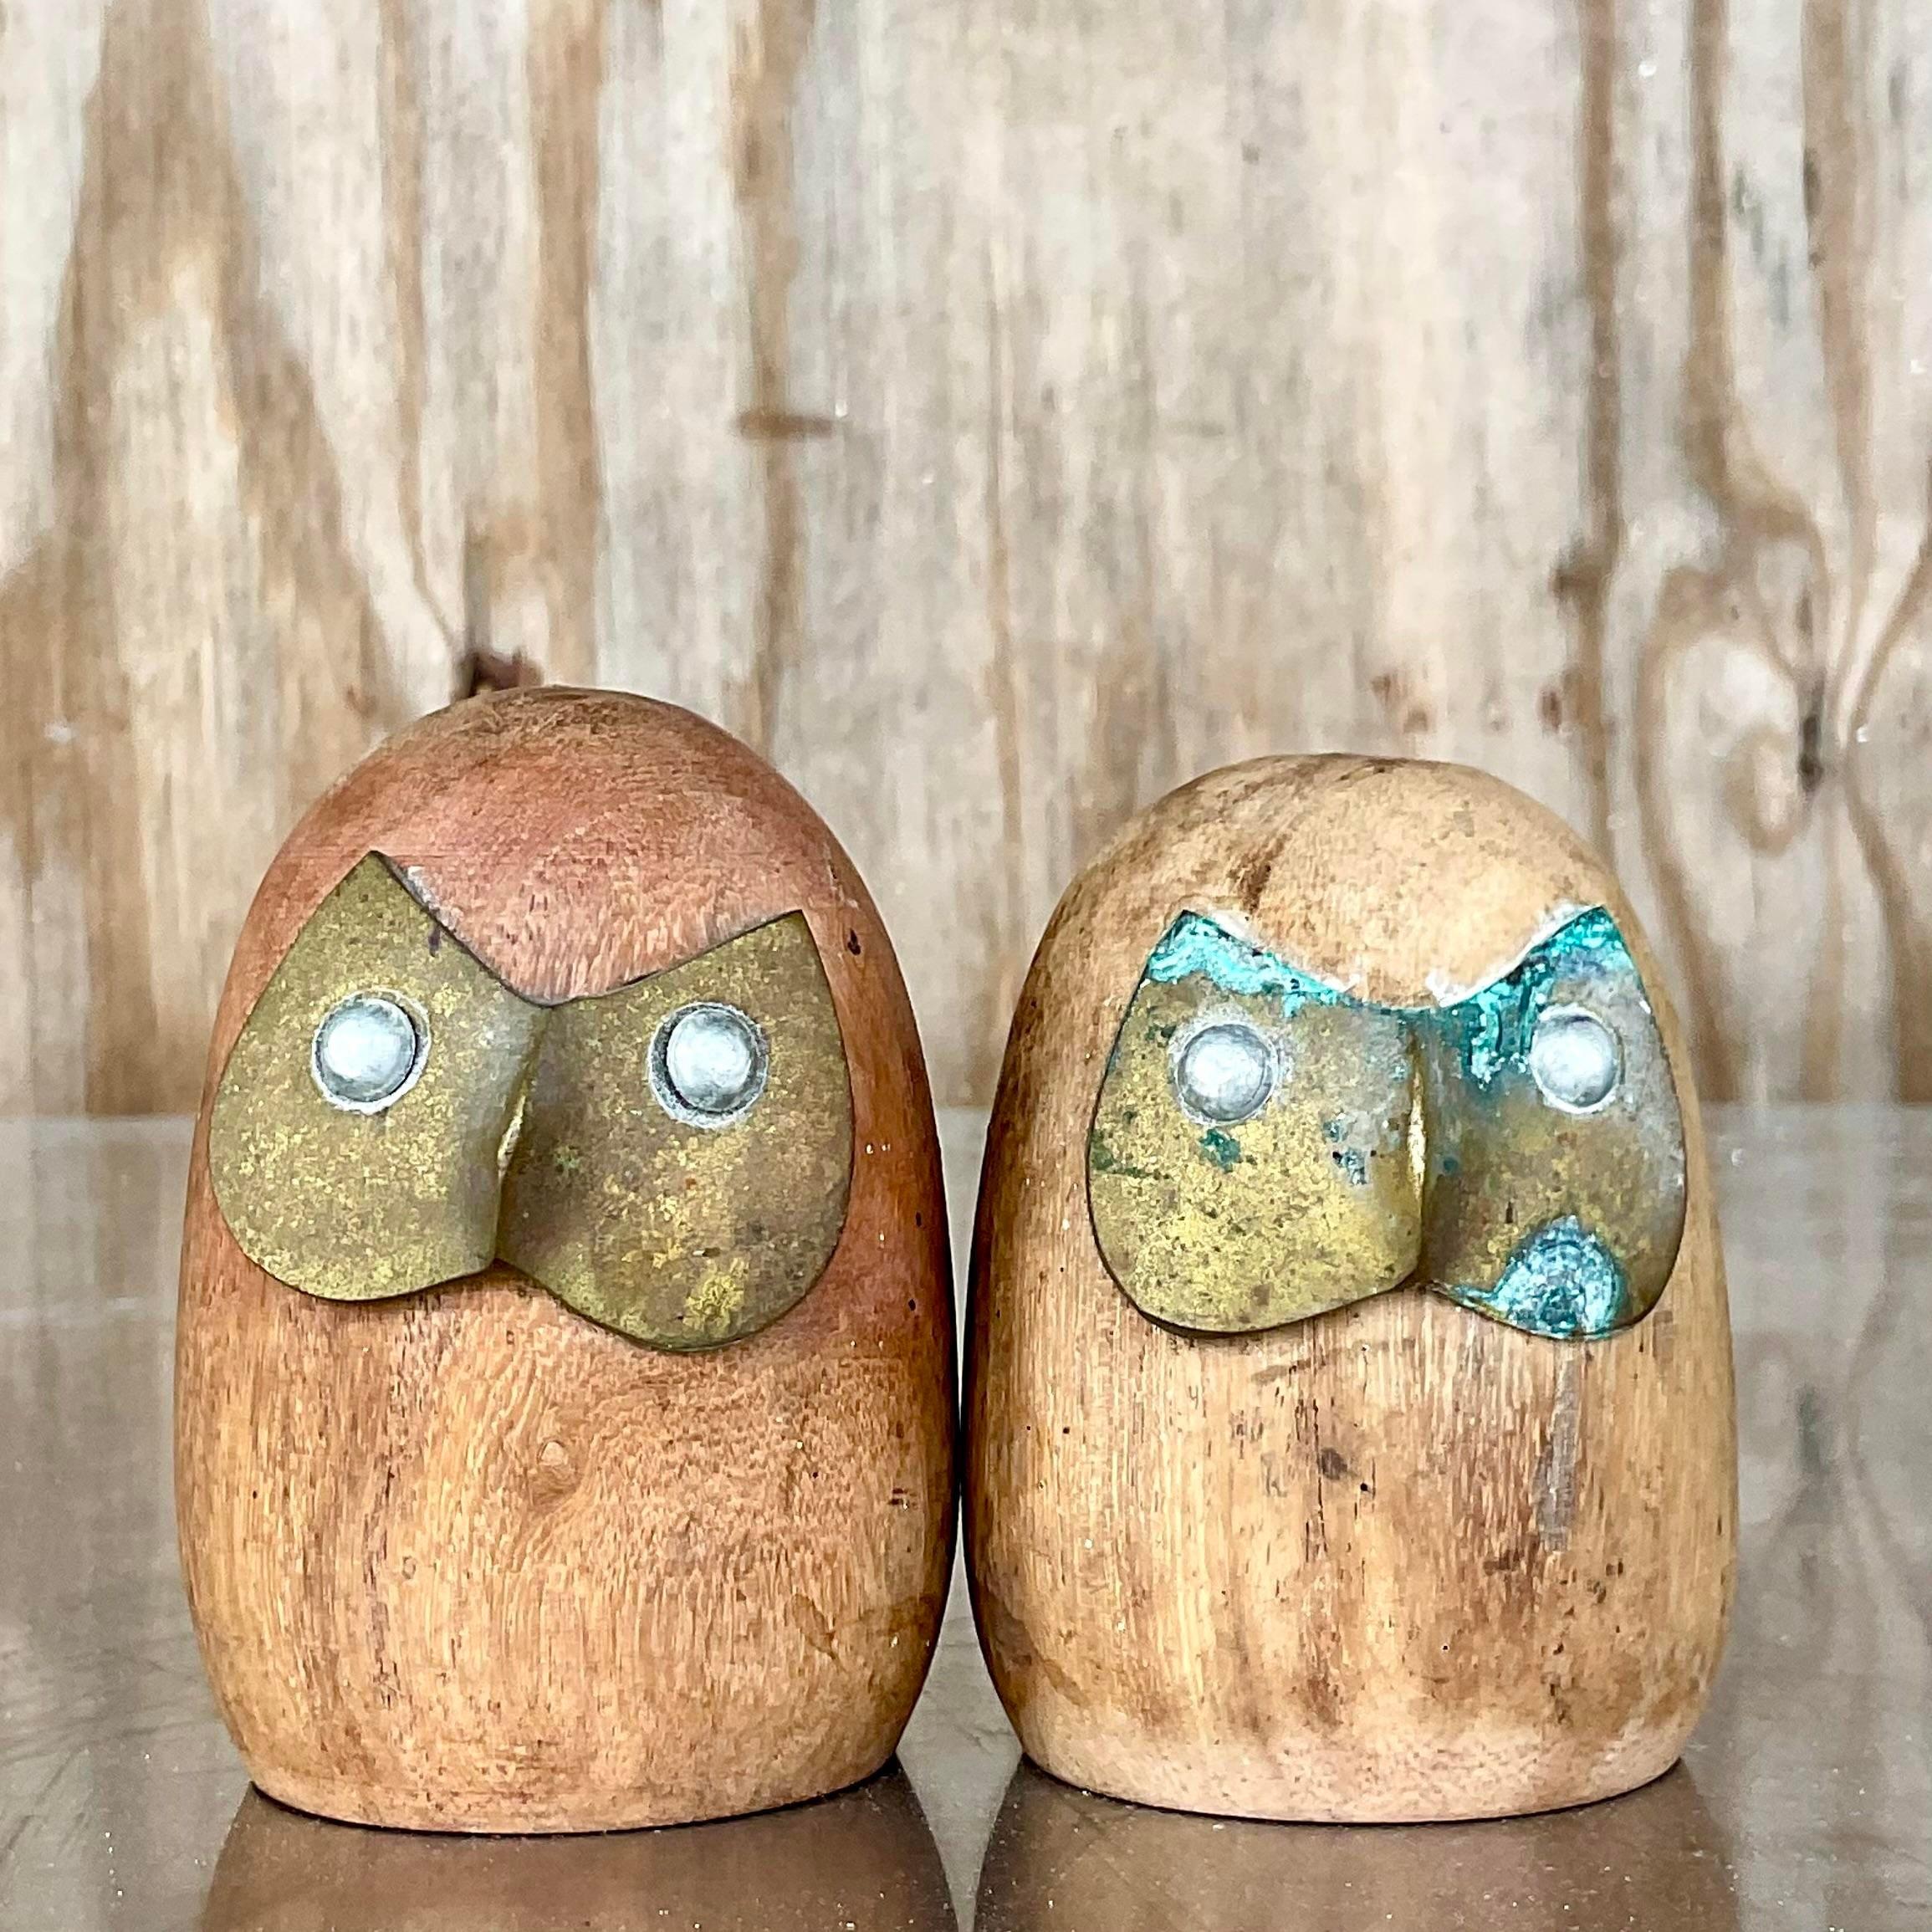 A fantastic pair of vintage owl figurines. Super charming pair of wood birds with great patina from time. Acquired from a Palm Beach estate. 